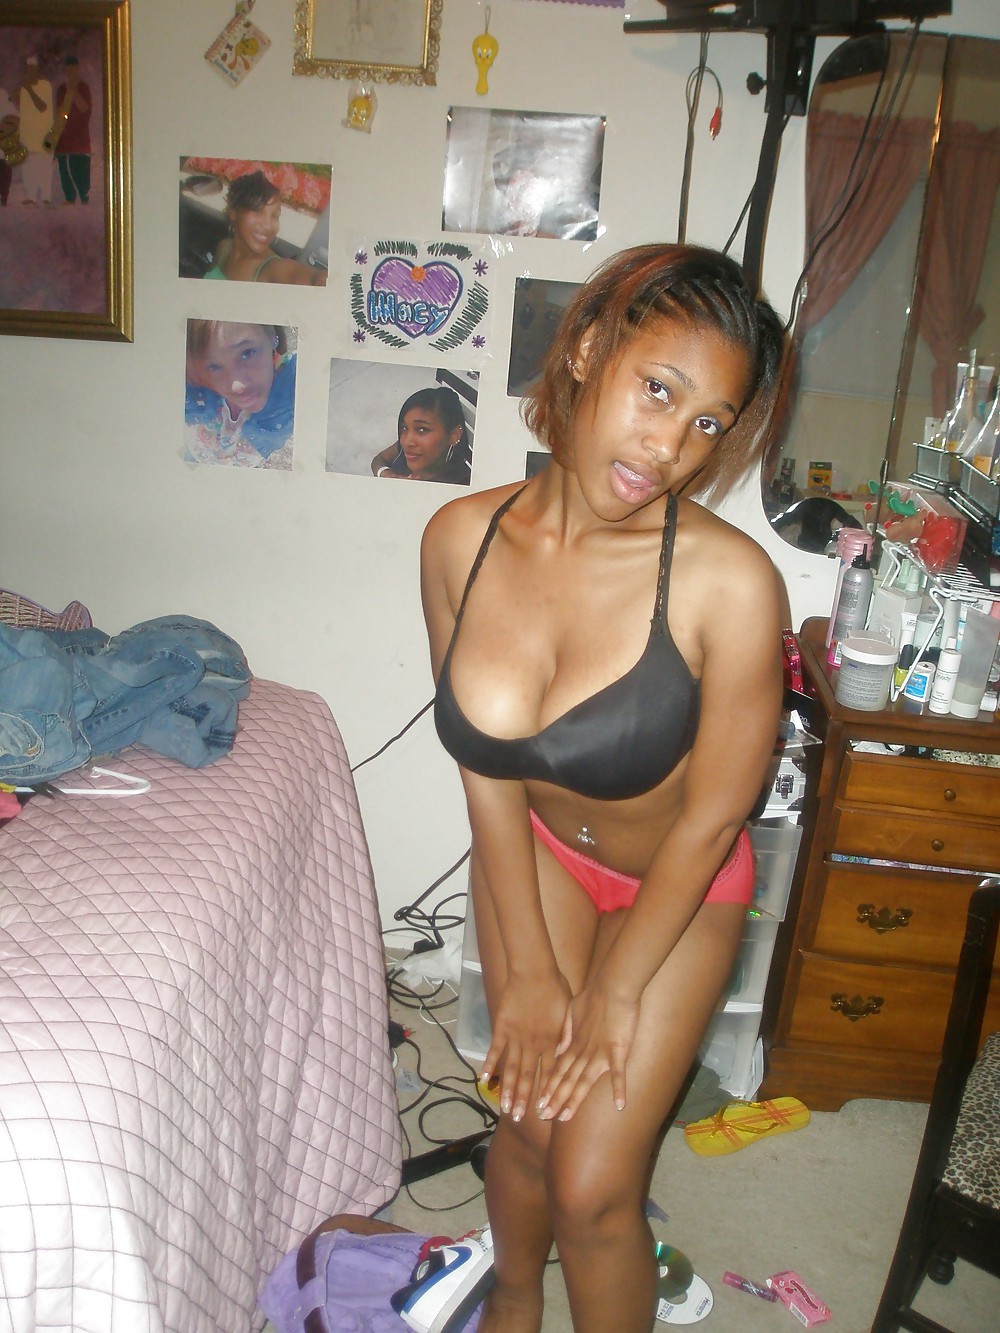 Pretty Ebony Teen In Bedroom Showing Huge Tits porn pictures